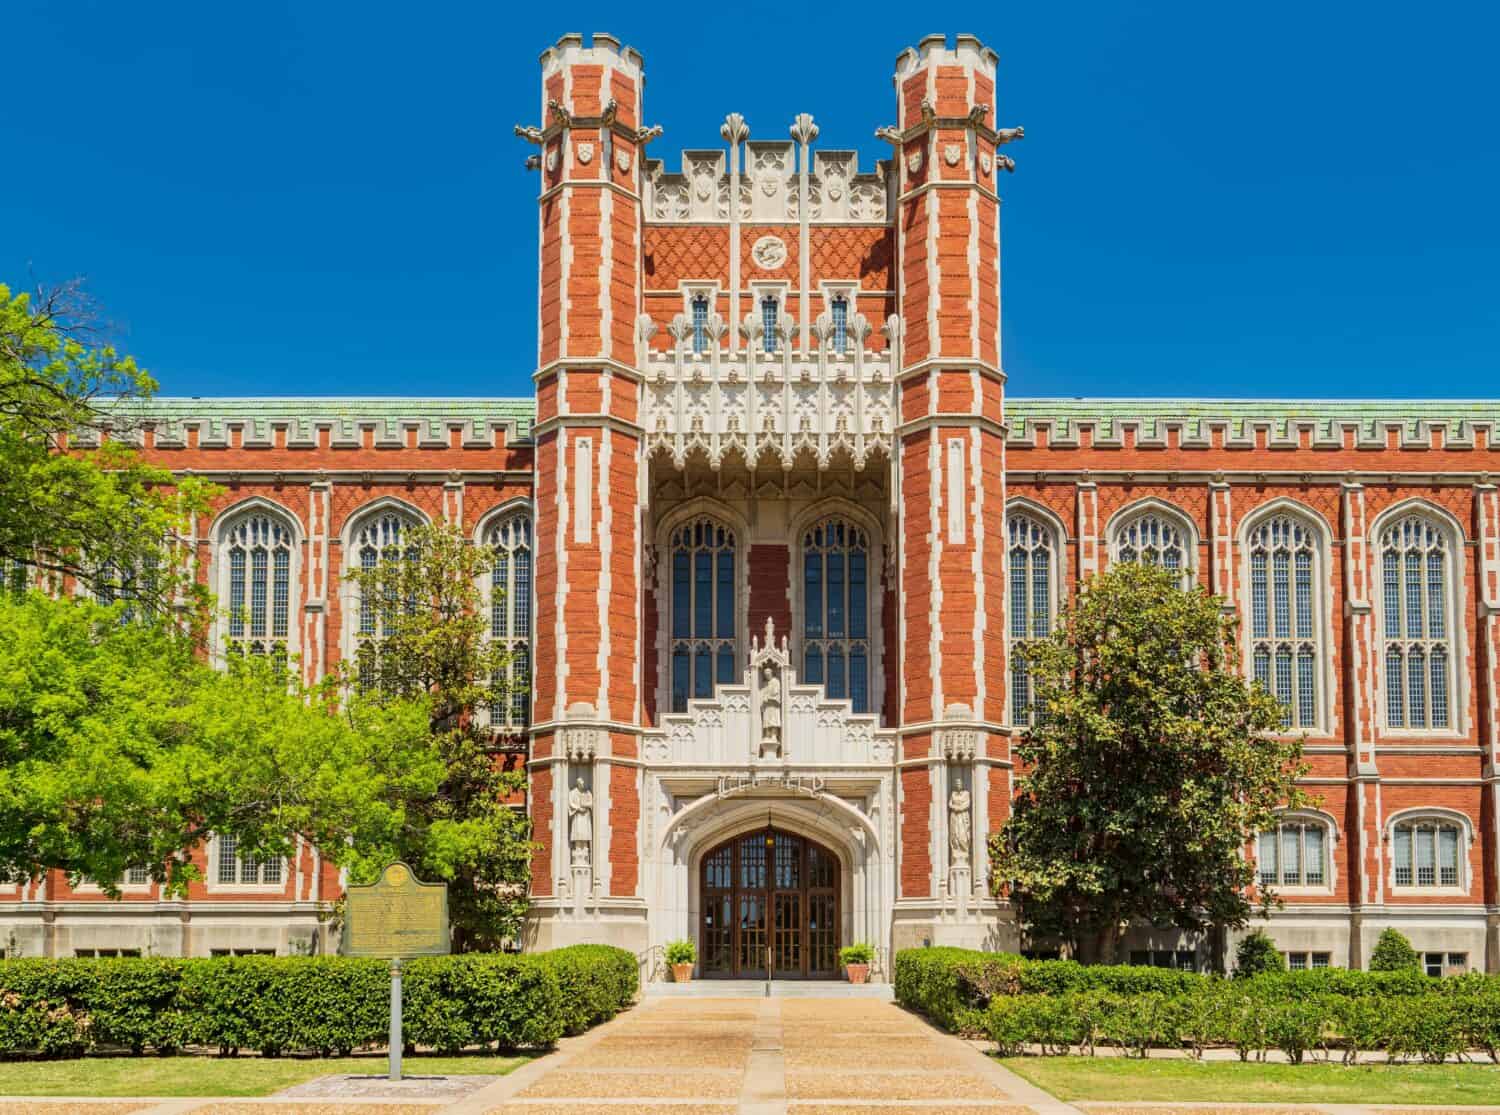 Sunny view of the Bizzell Memorial Library of University of Oklahoma at Oklahoma